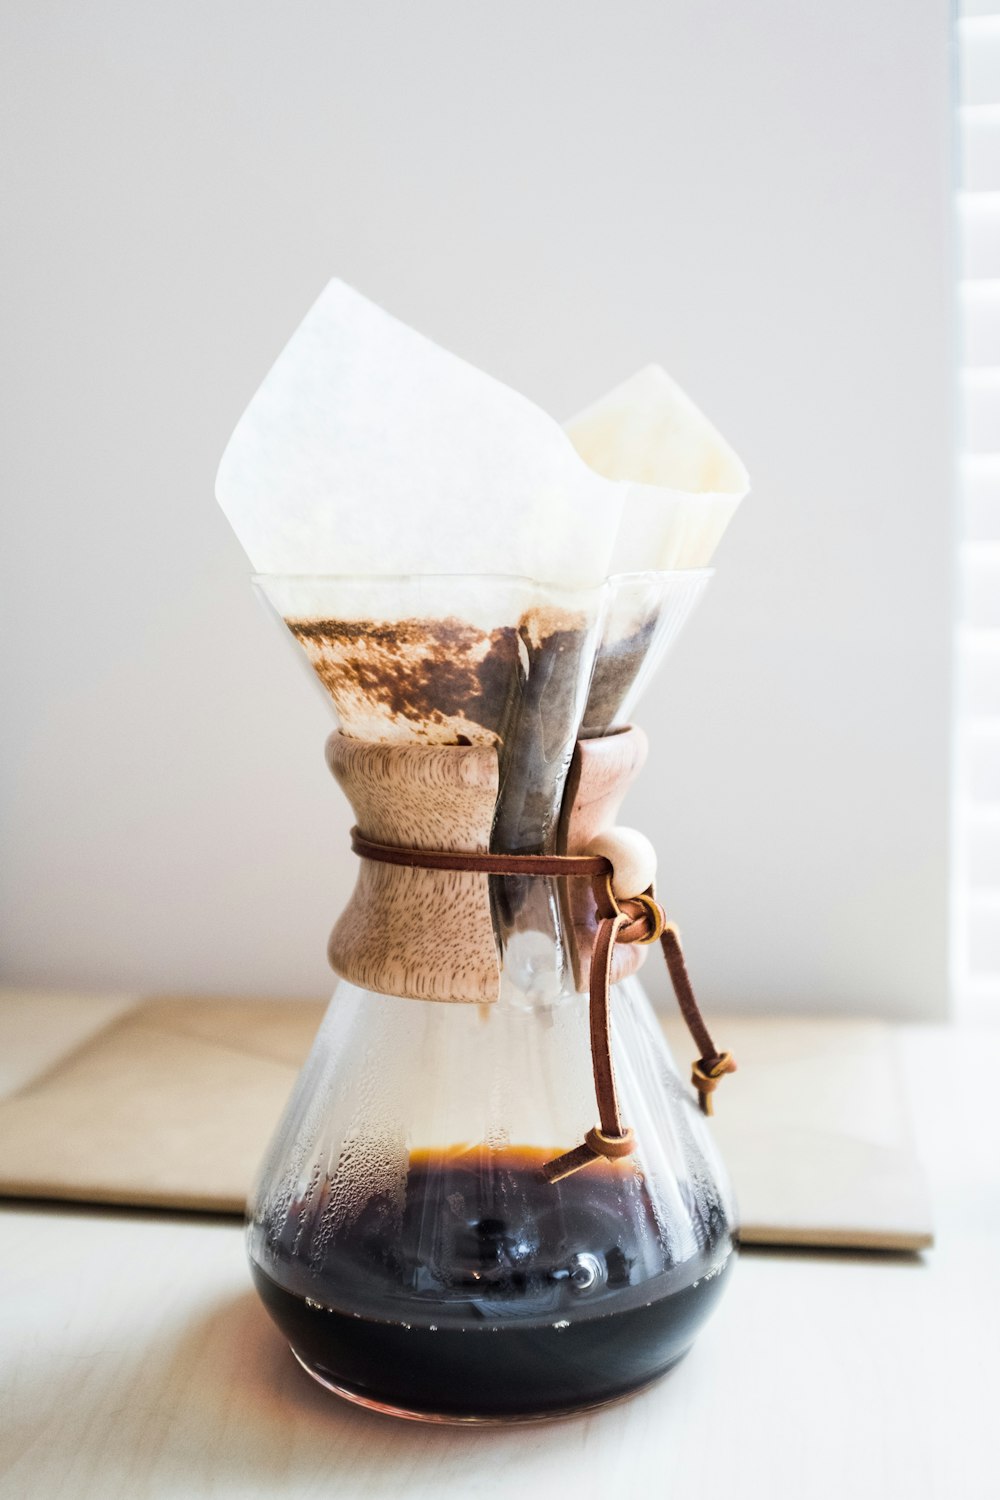 clear glass pitcher on top of brown wooden surface